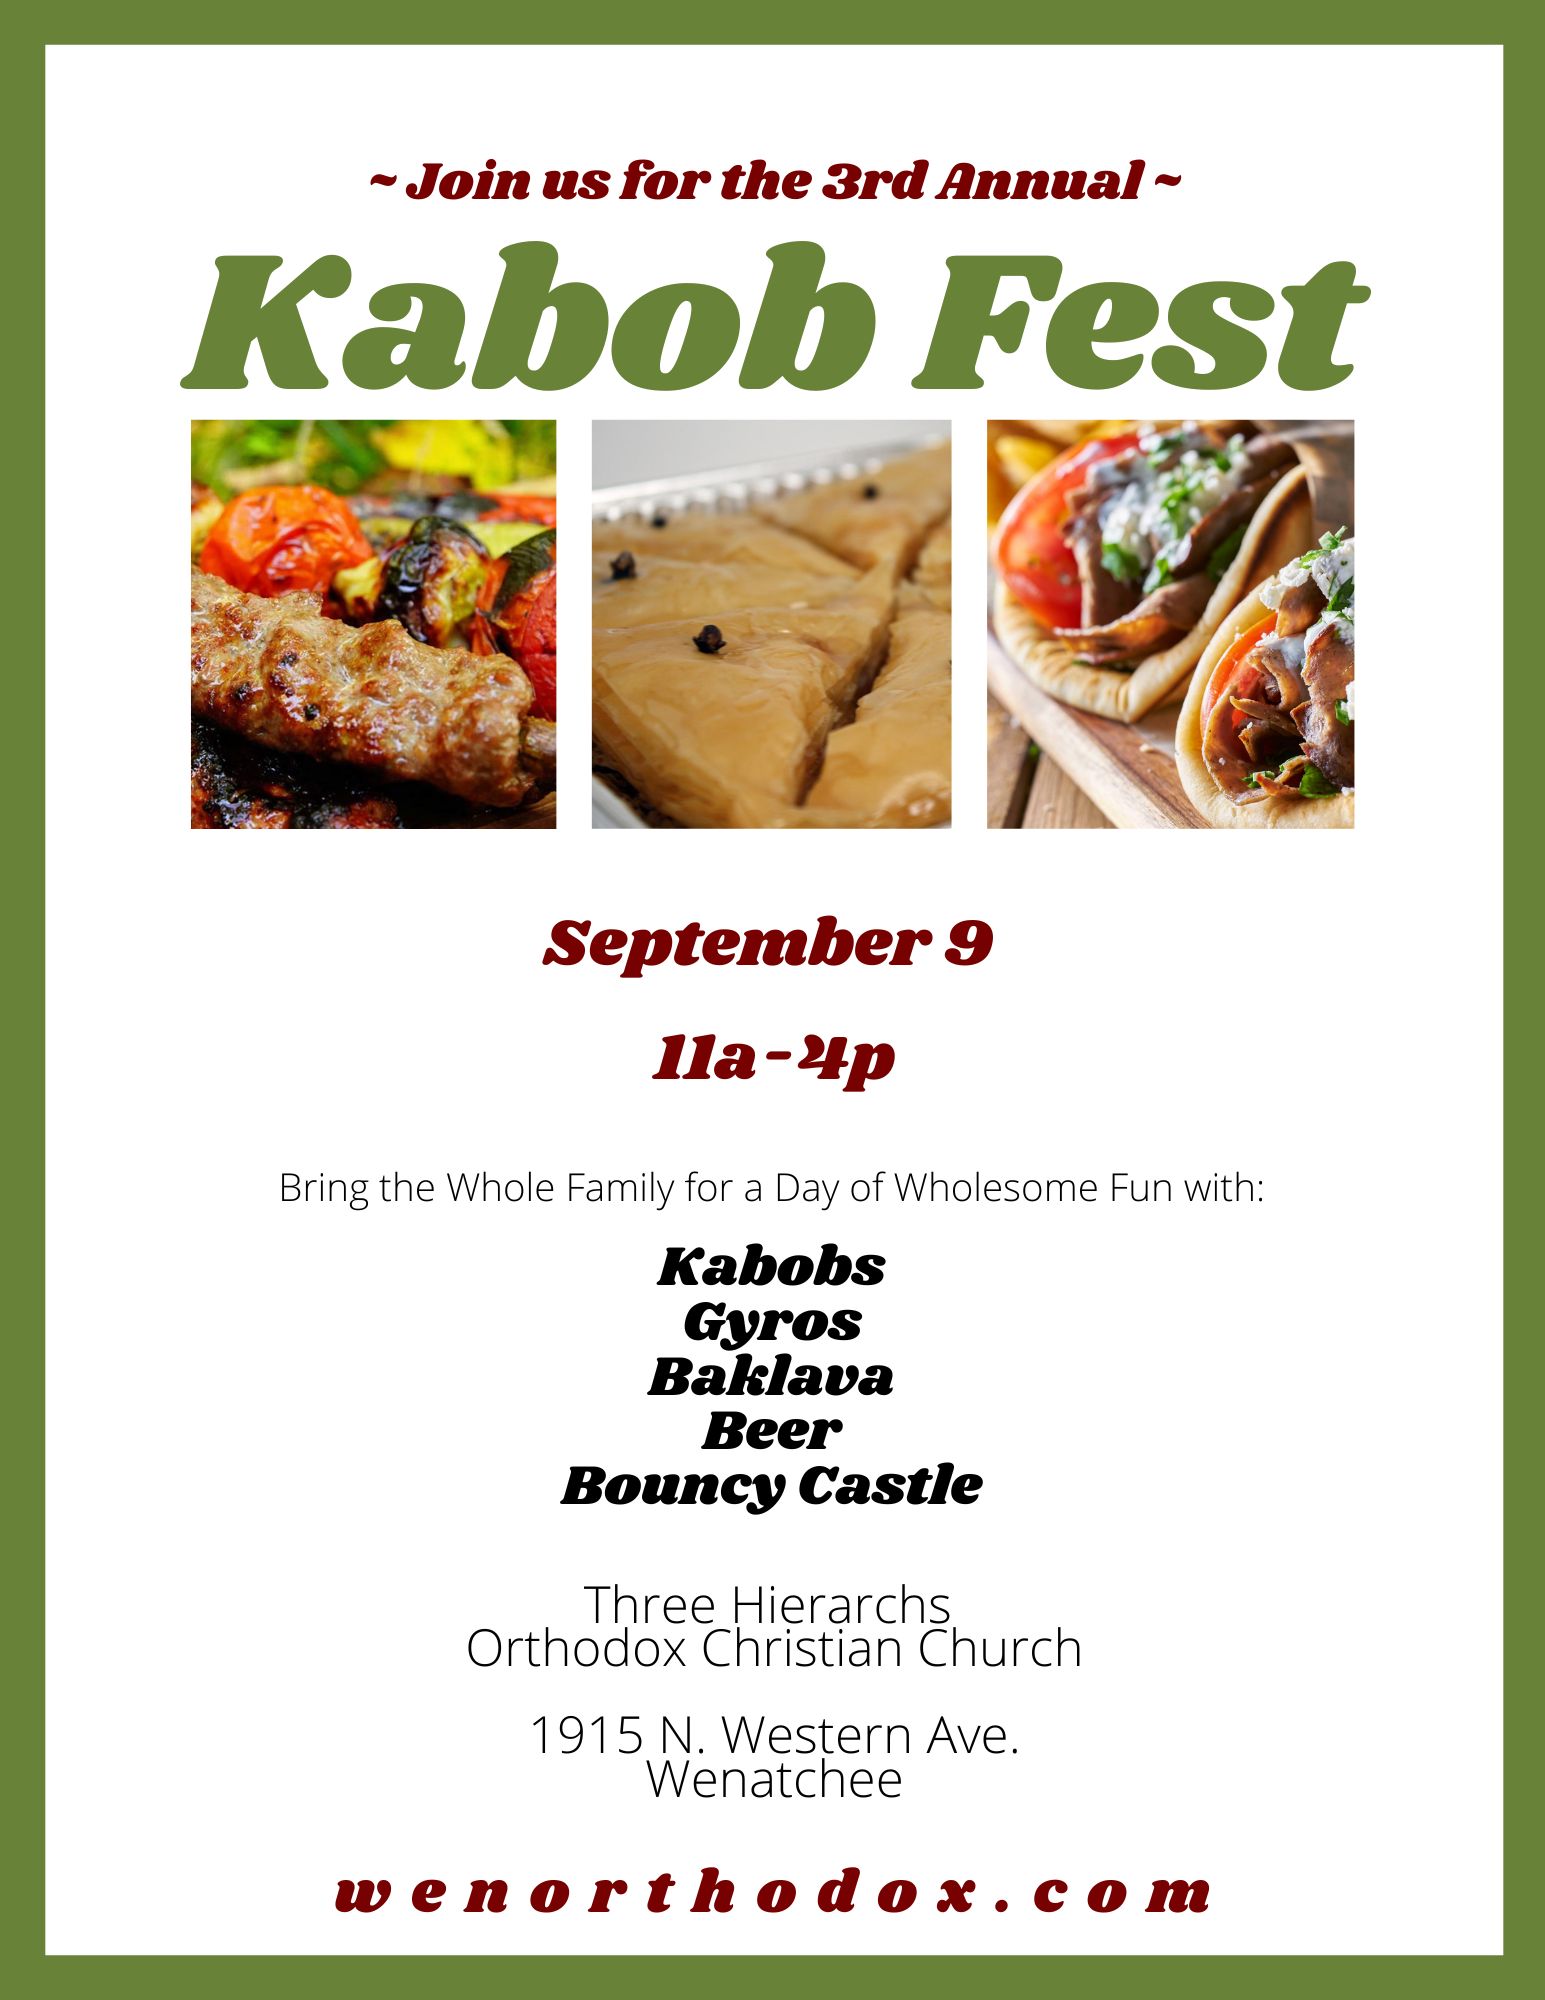 <h1 class="tribe-events-single-event-title">3rd Annual Kabob Fest</h1>